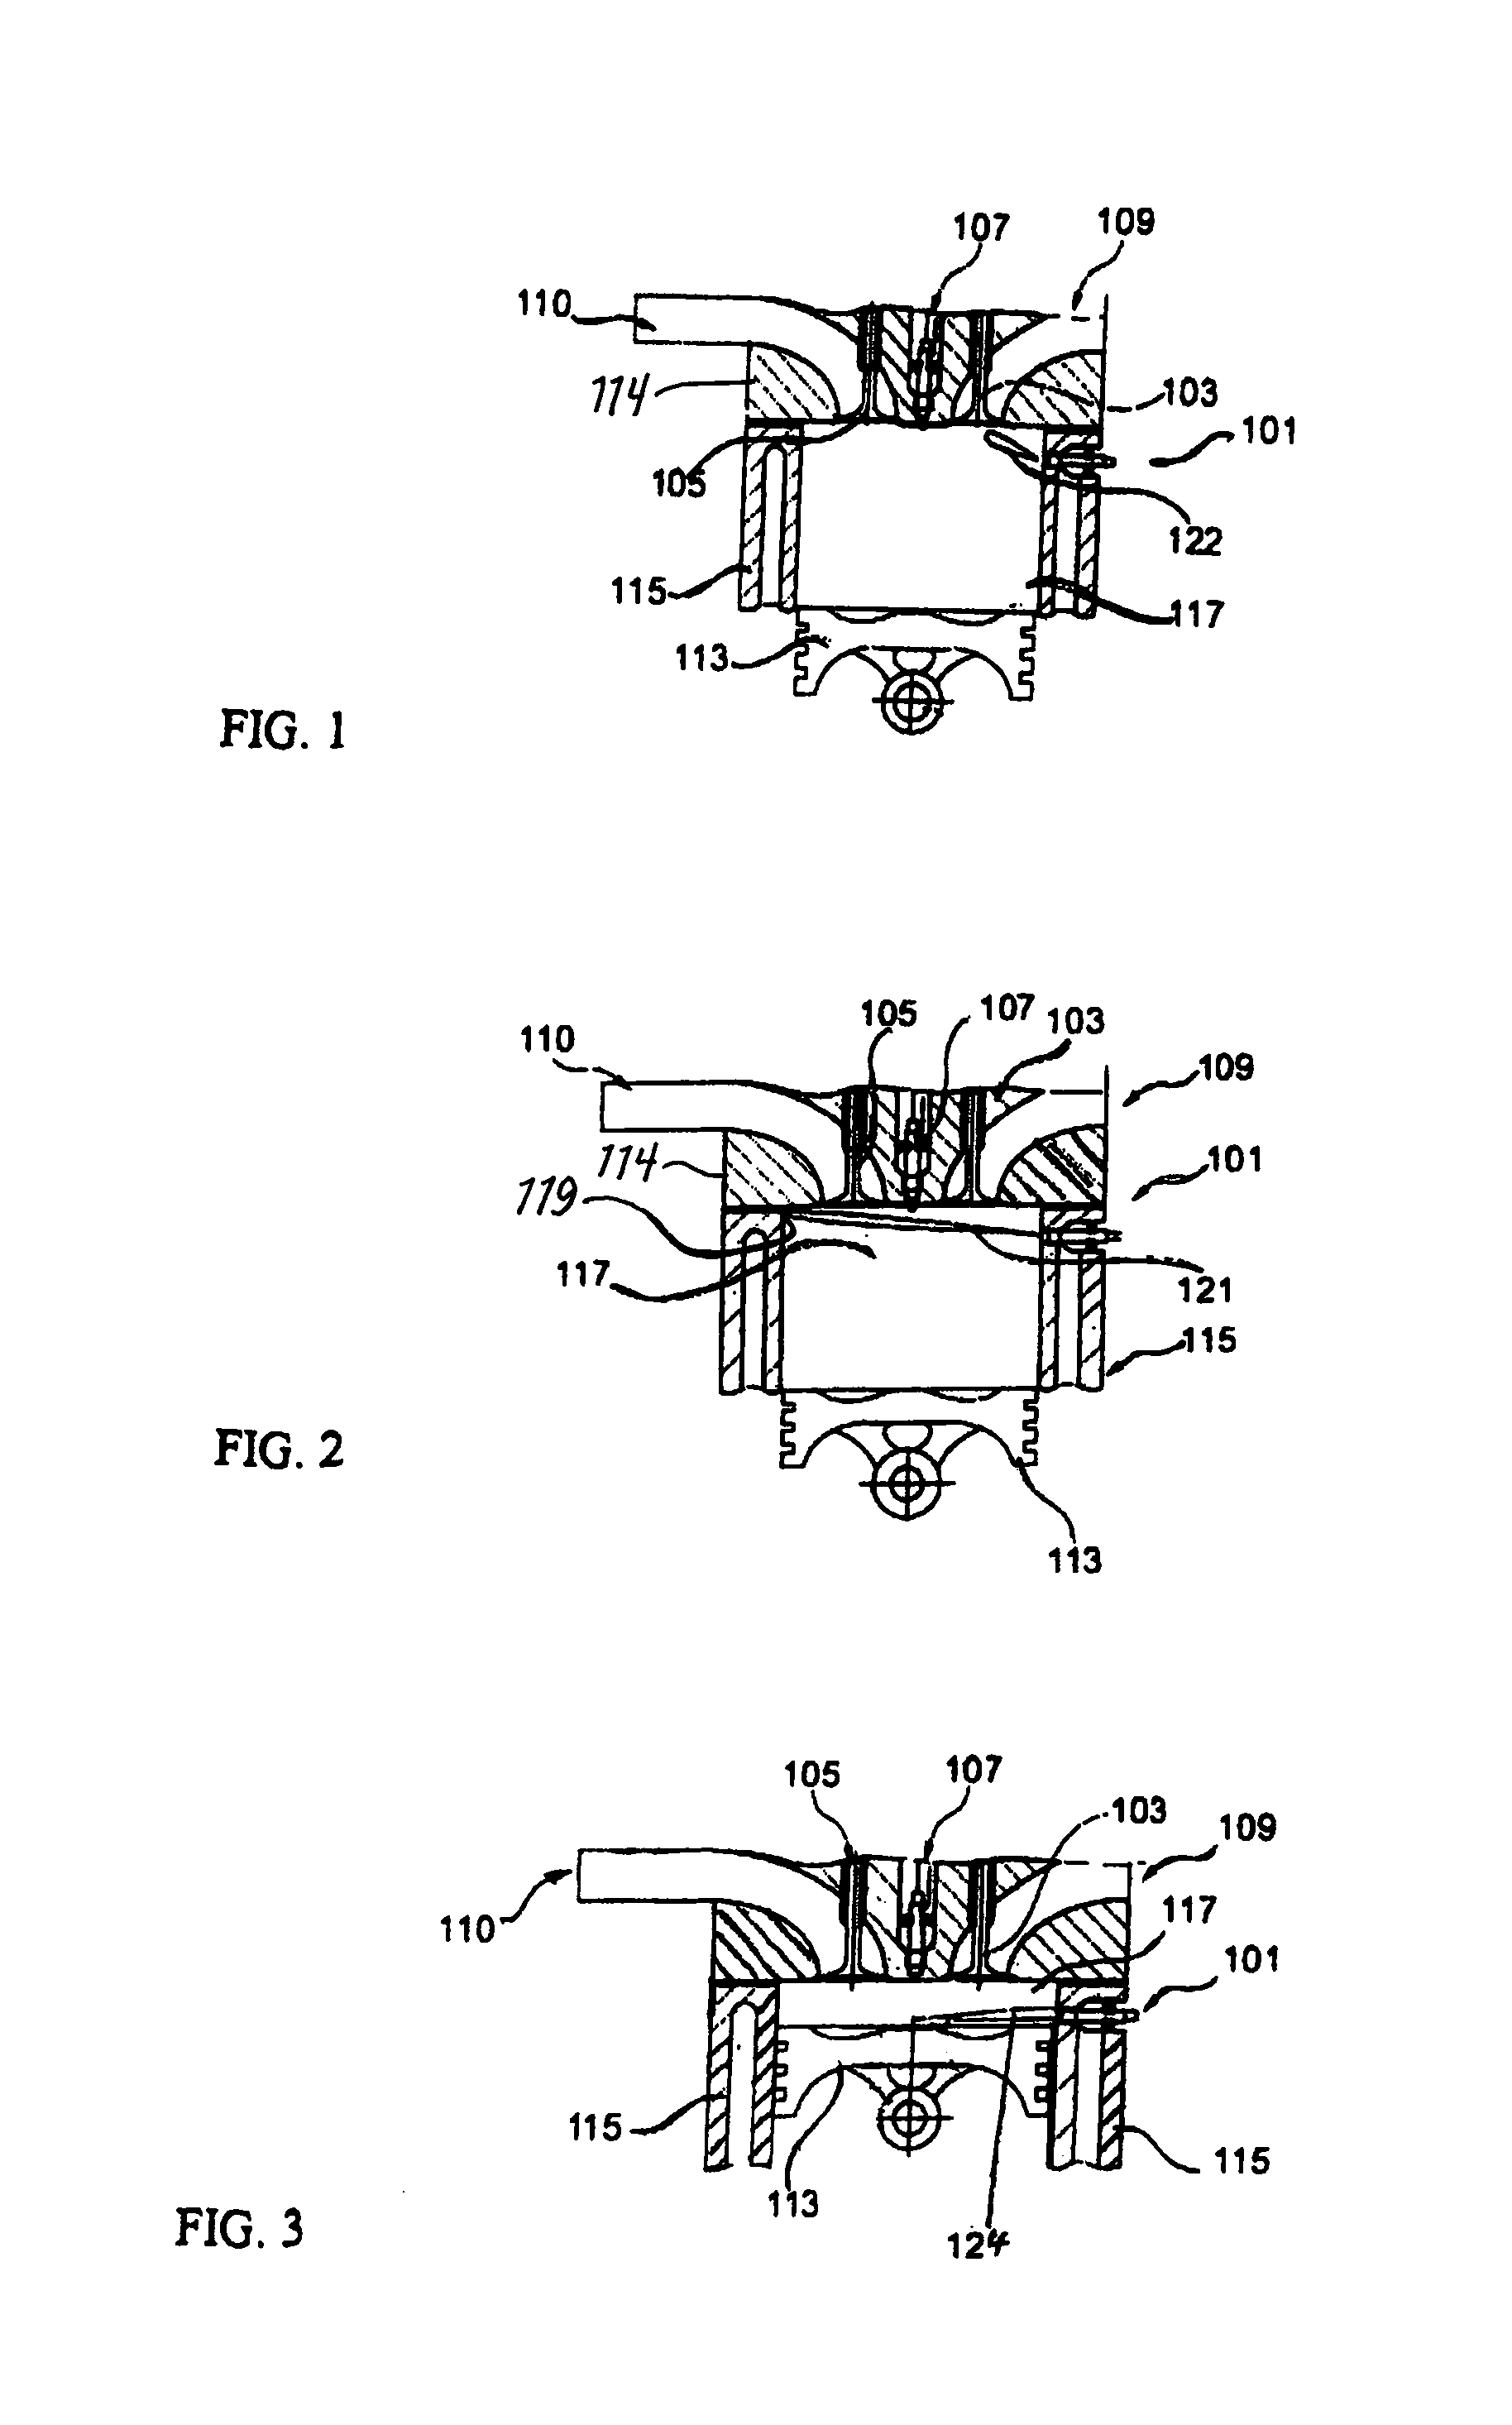 Fuel Injection System for Diesel Engines with Compression Ignition